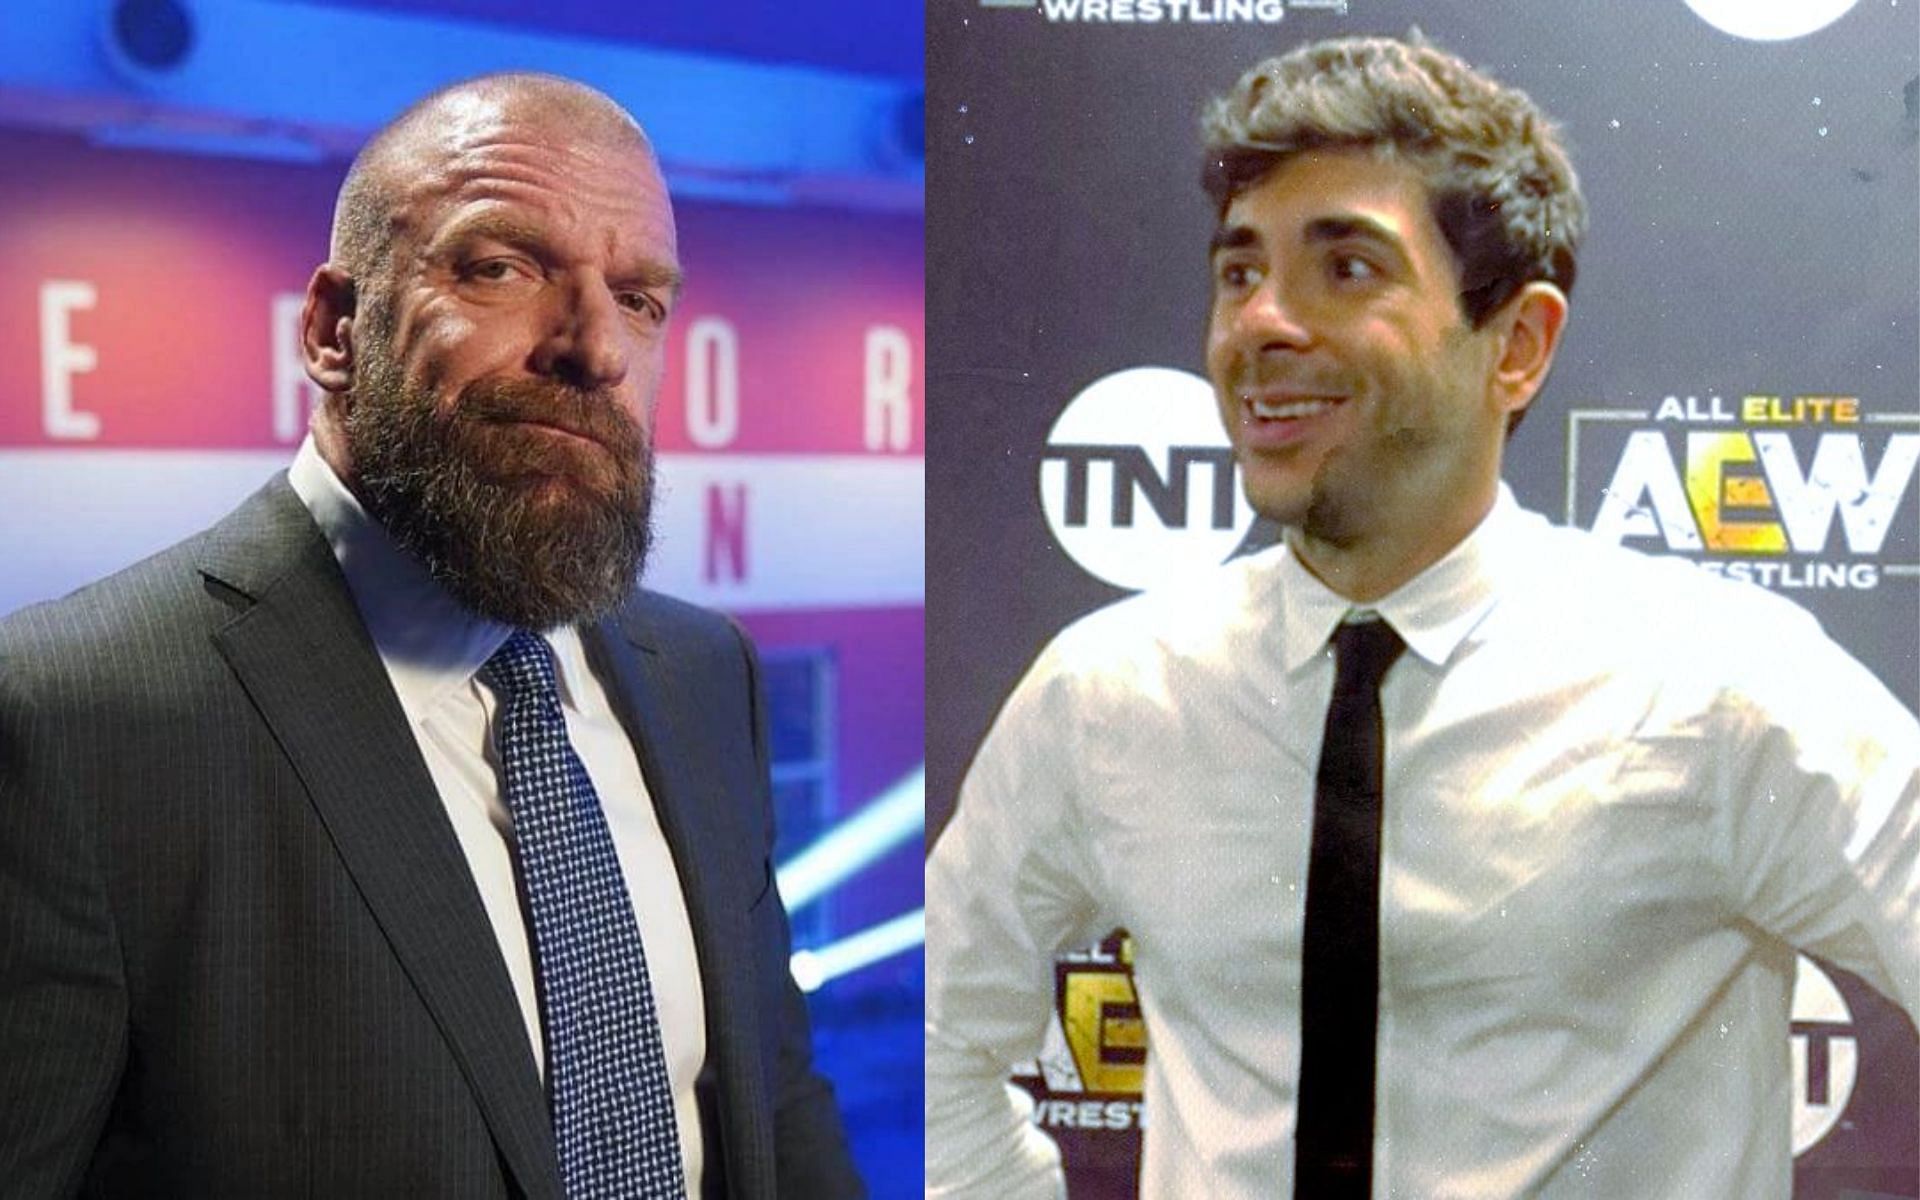 Head of creative for WWE, Triple H (left) and AEW President Tony Khan (right).